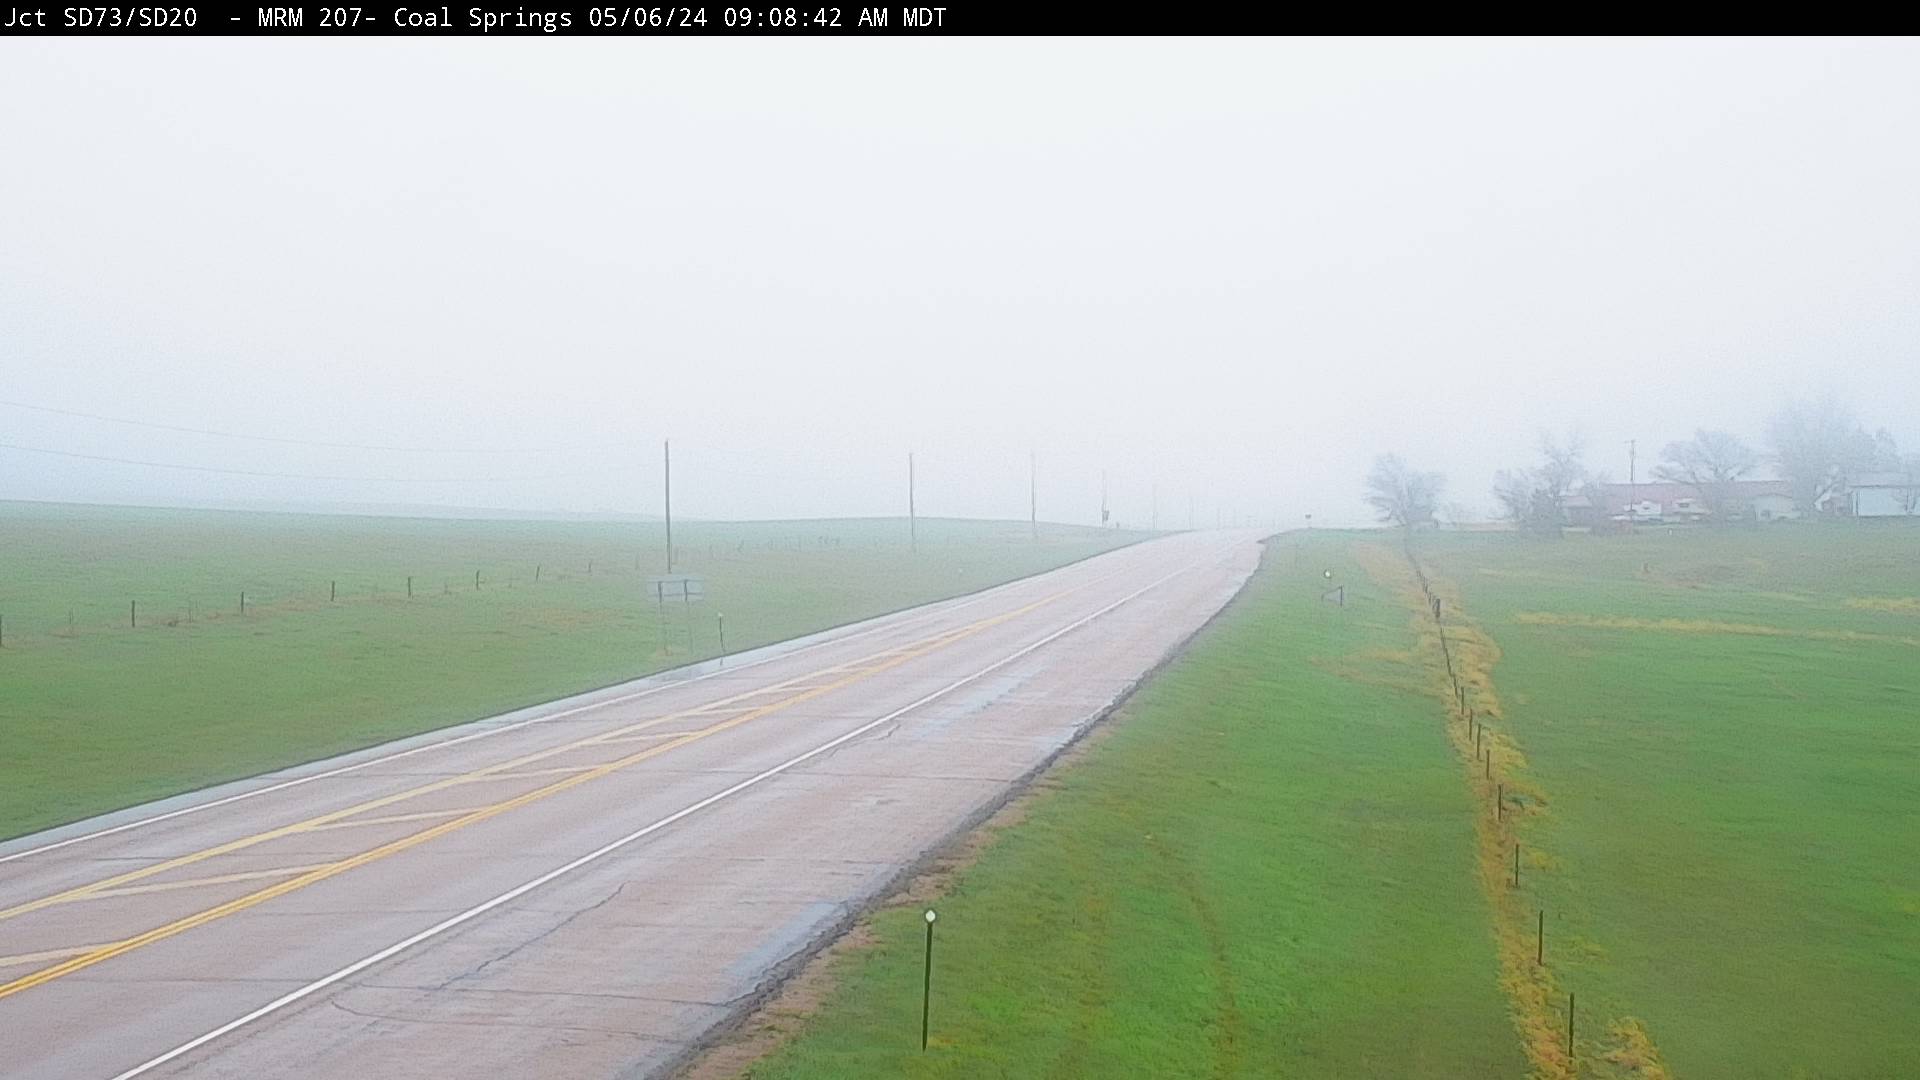 West of town at junction SD-20 & SD-73 - East Traffic Camera